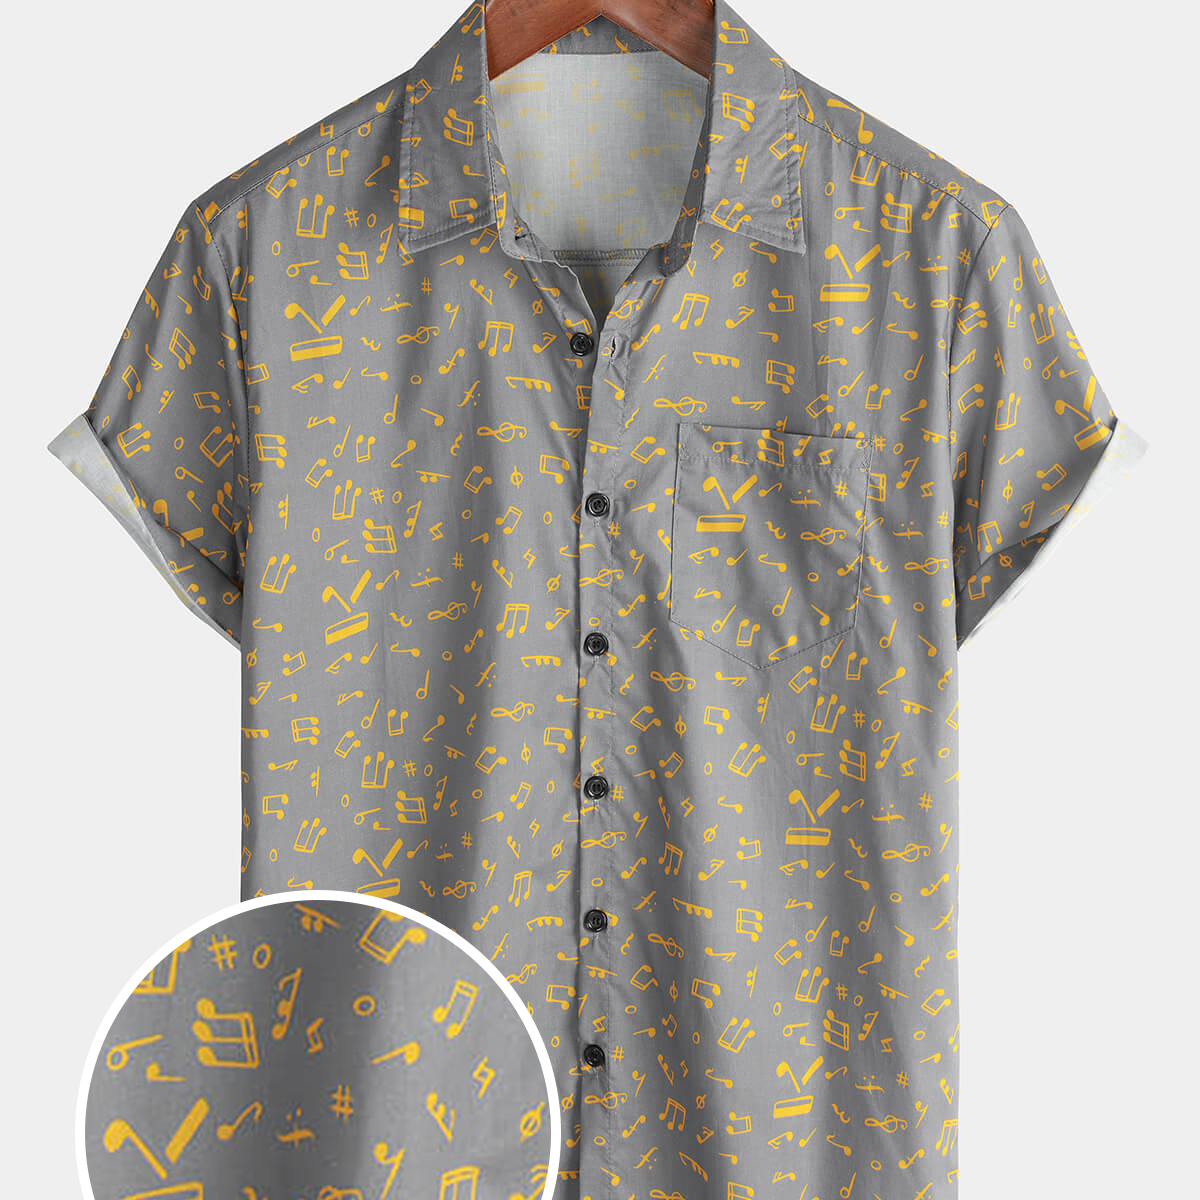 Men's Short Sleeve Holiday Summer Music Festival Funny Button Up Cotton Shirt